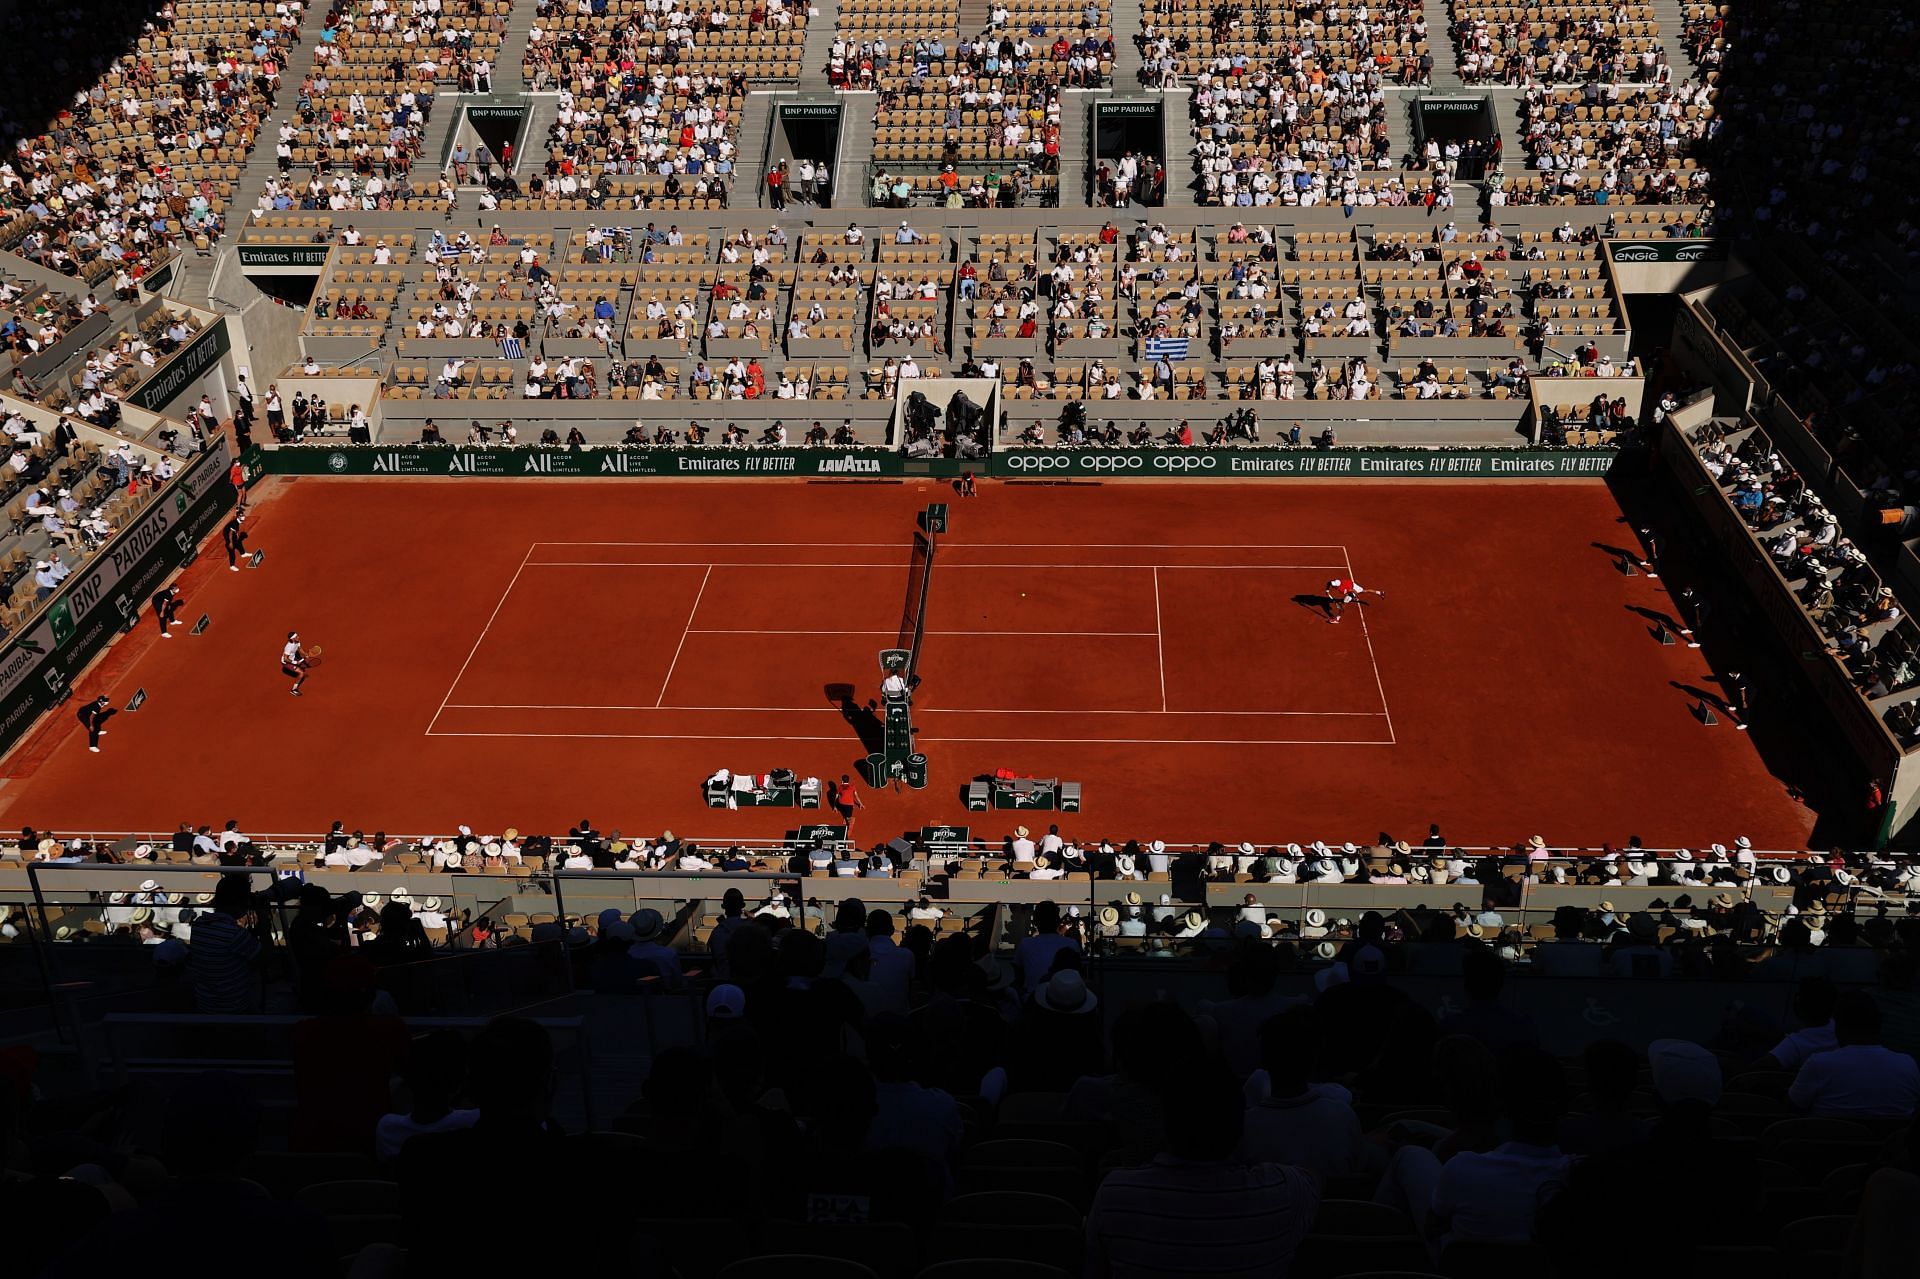 Court Philippe-Chatrier in the French Open men's singles final 2021